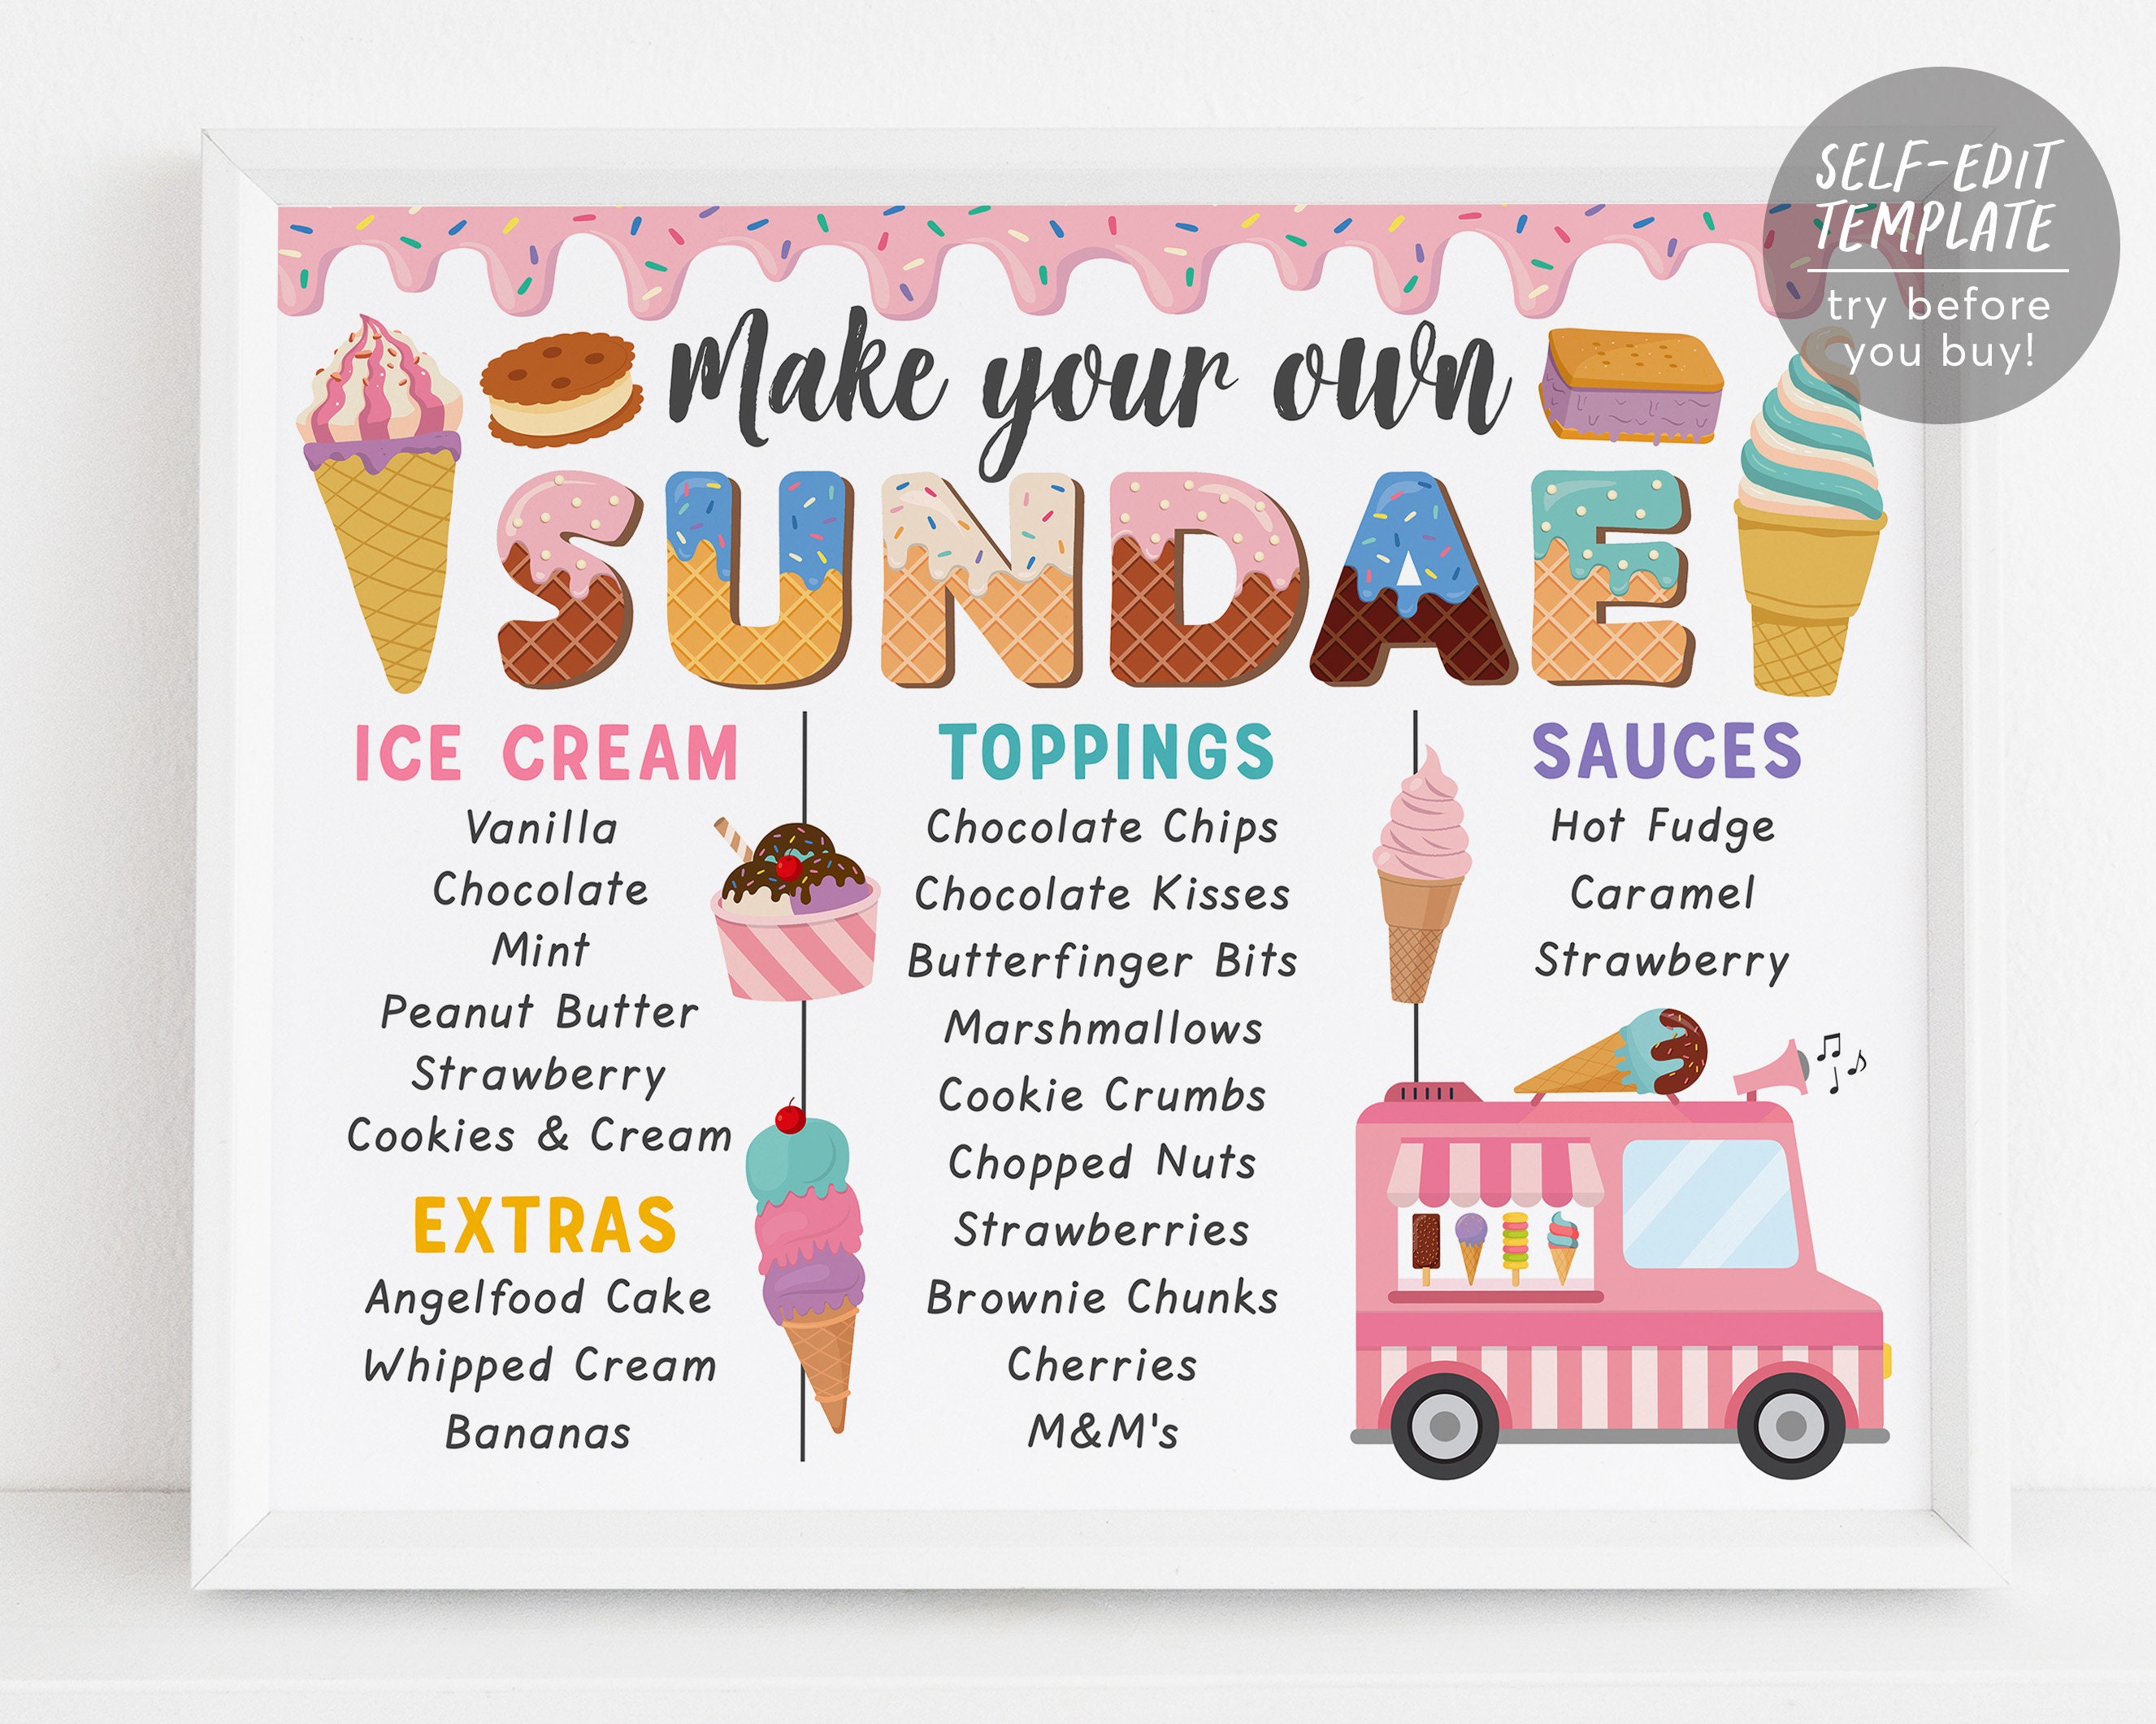 Make Your Own Sundae Kits For Parties - Stewart's Shops